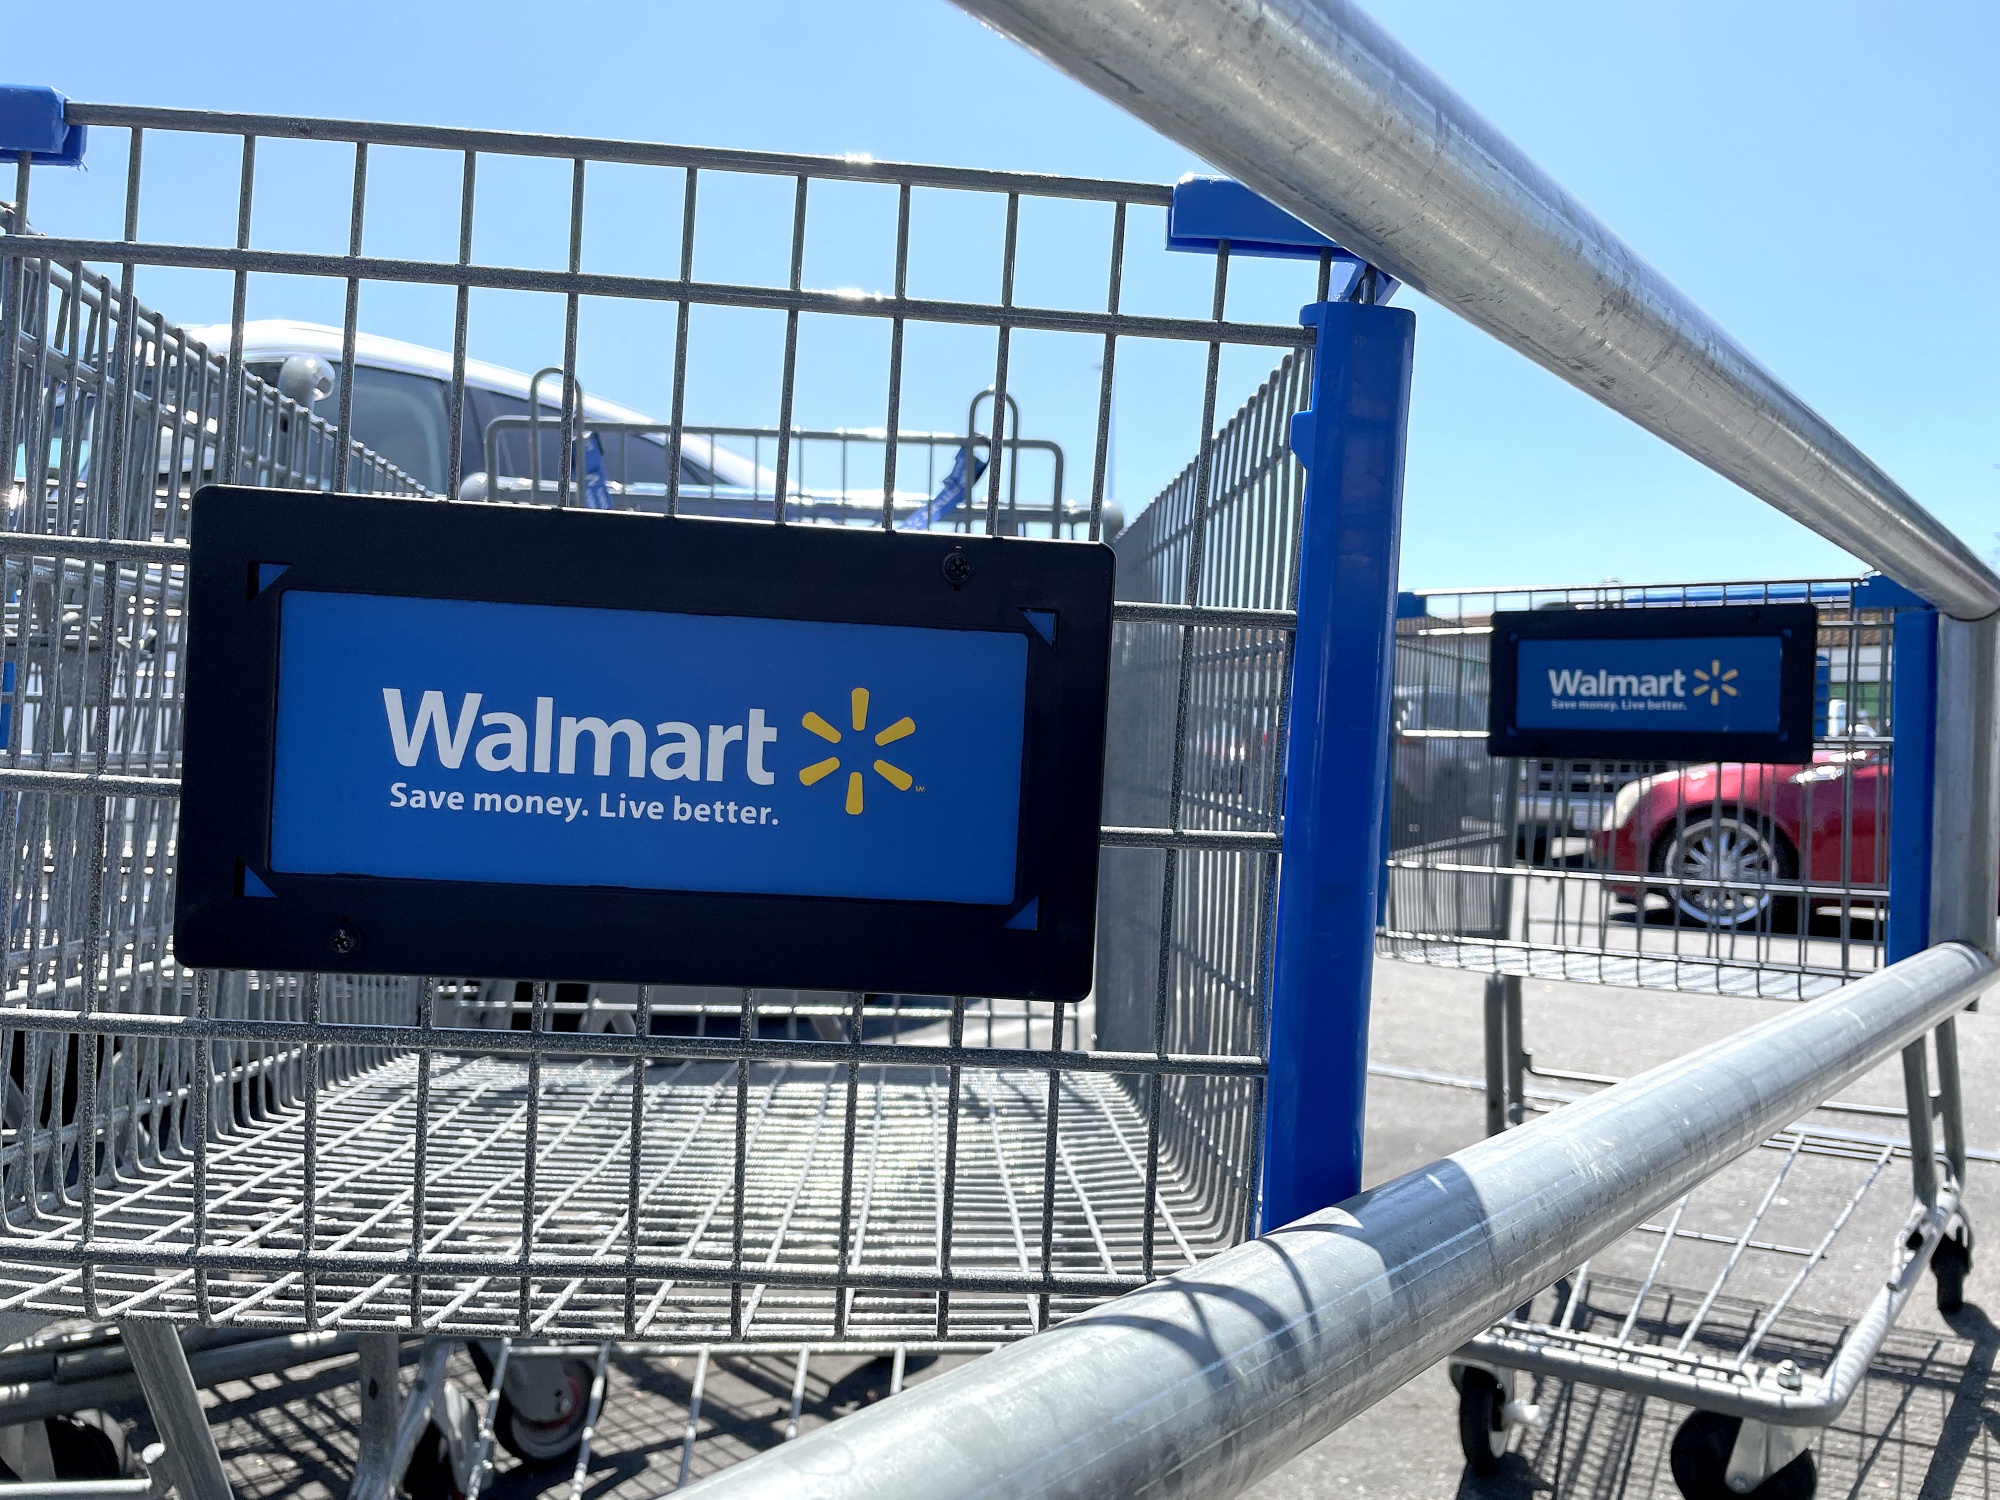 Can Wal-Mart Stores Inc (WMT) Stock Stay Hot?